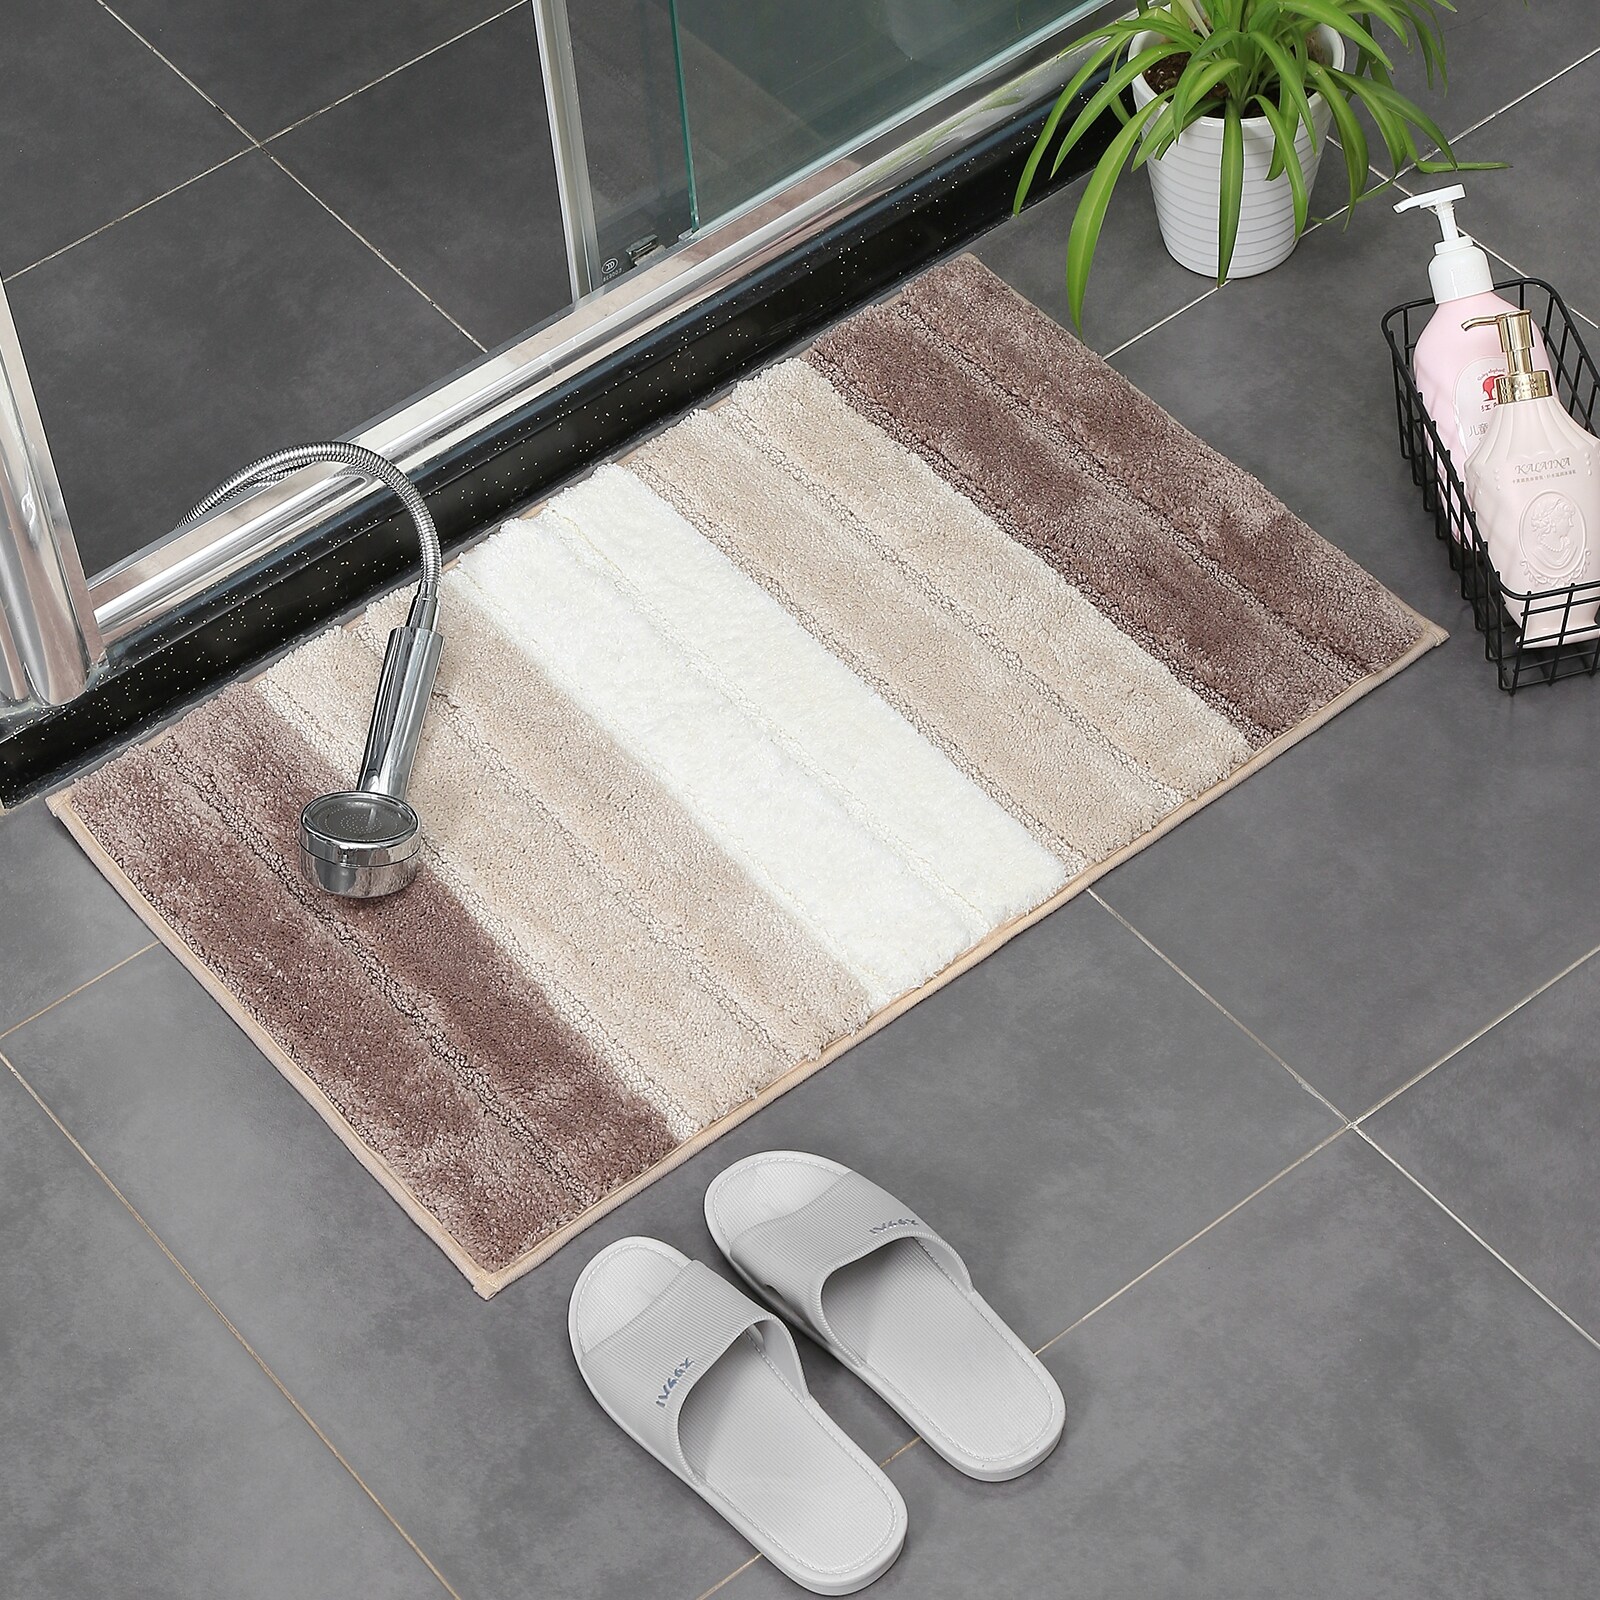 https://ak1.ostkcdn.com/images/products/is/images/direct/fc520f6ab3b1565e24cd730672ebc785f2f7593d/Striped-Bath-Rugs-Bathroom-Mat-Water-Absorbent-Non-Slip-Backing-Pads.jpg